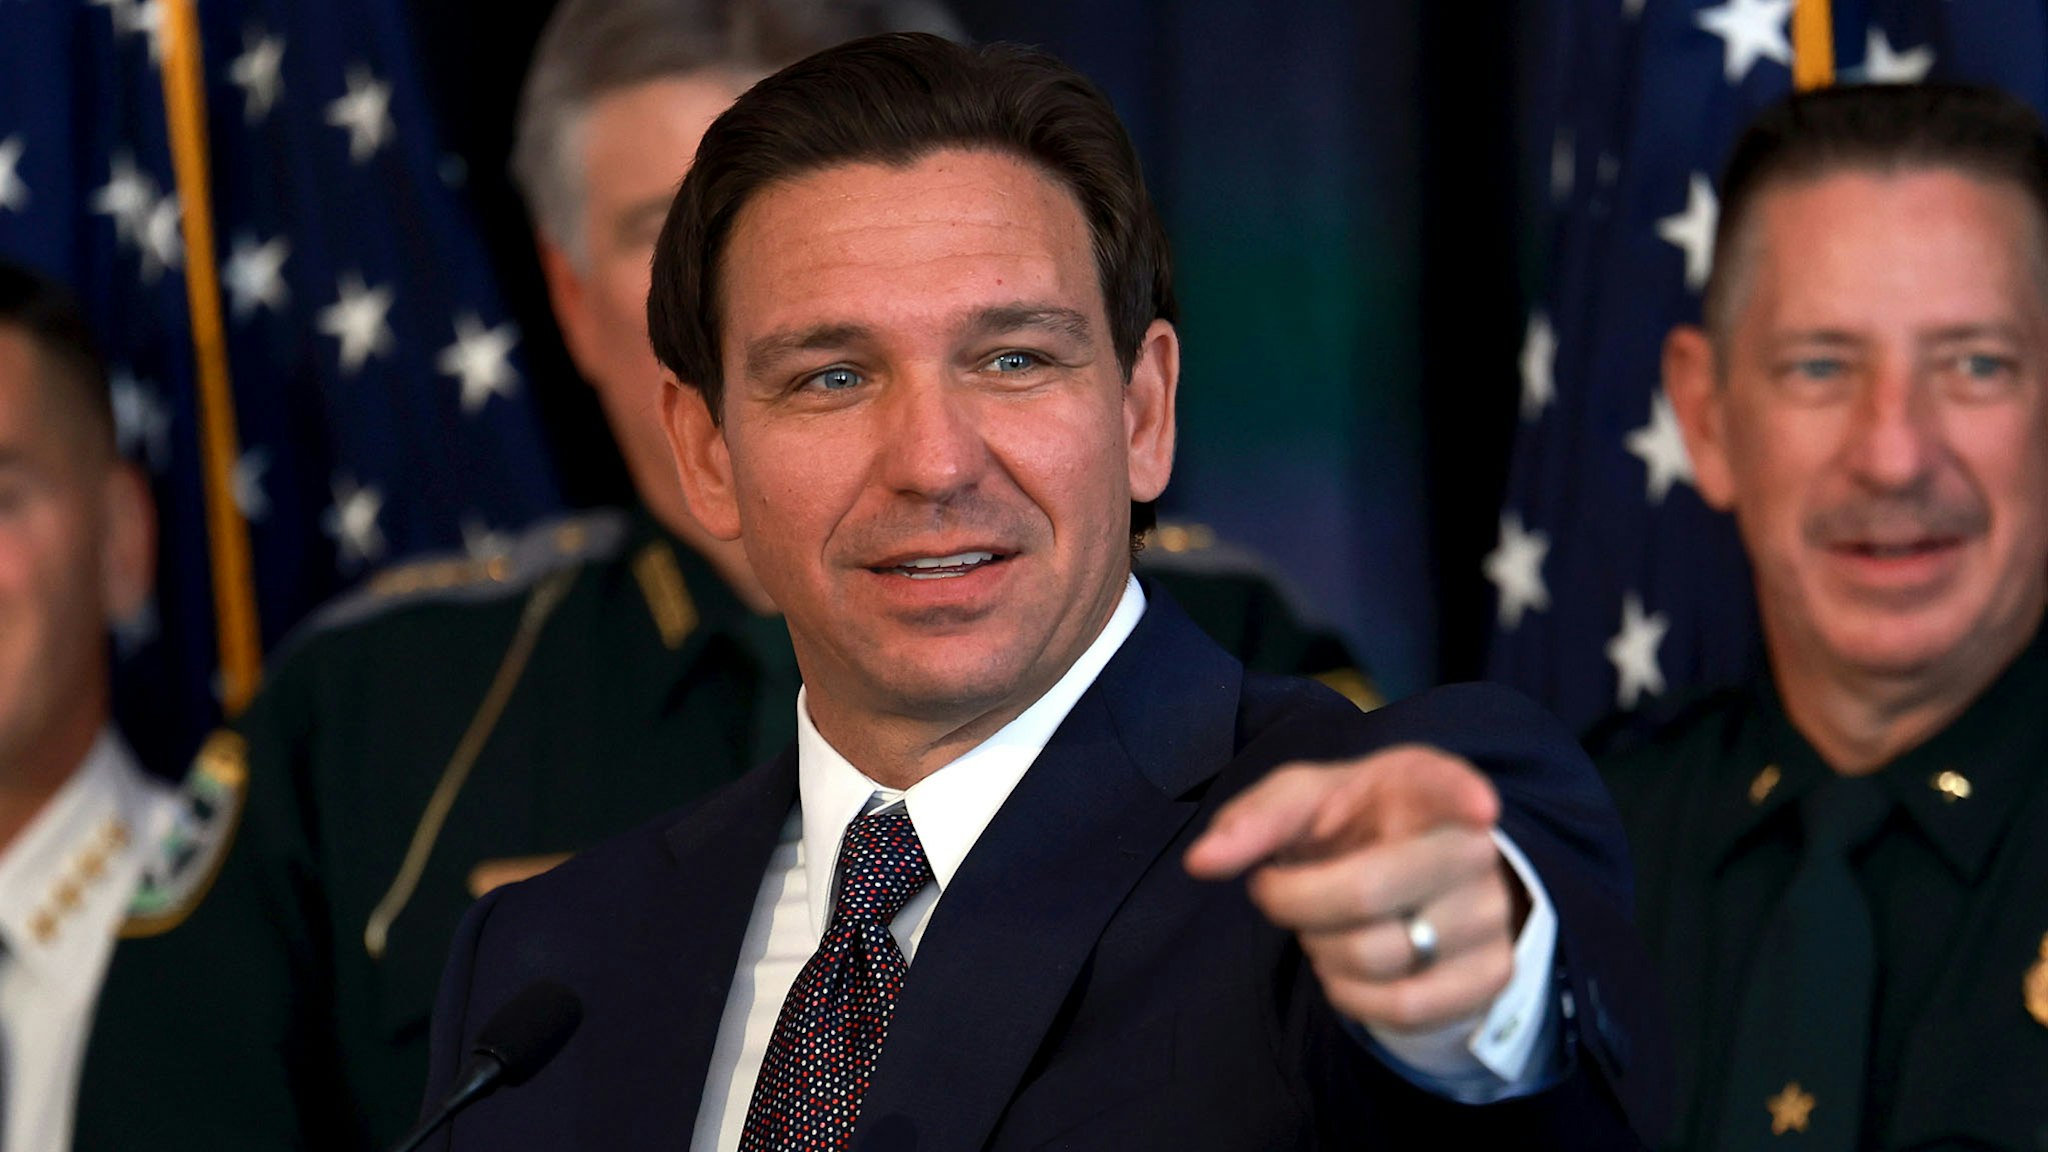 TAMPA, FLORIDA - OCTOBER 05: Republican presidential candidate Florida Gov. Ron DeSantis speaks during a campaign event at The Vault on October 05, 2023 in Tampa, Florida. Ron DeSantis held the campaign event with Florida sheriffs after receiving endorsements from 60 bipartisan Florida law enforcement officers.